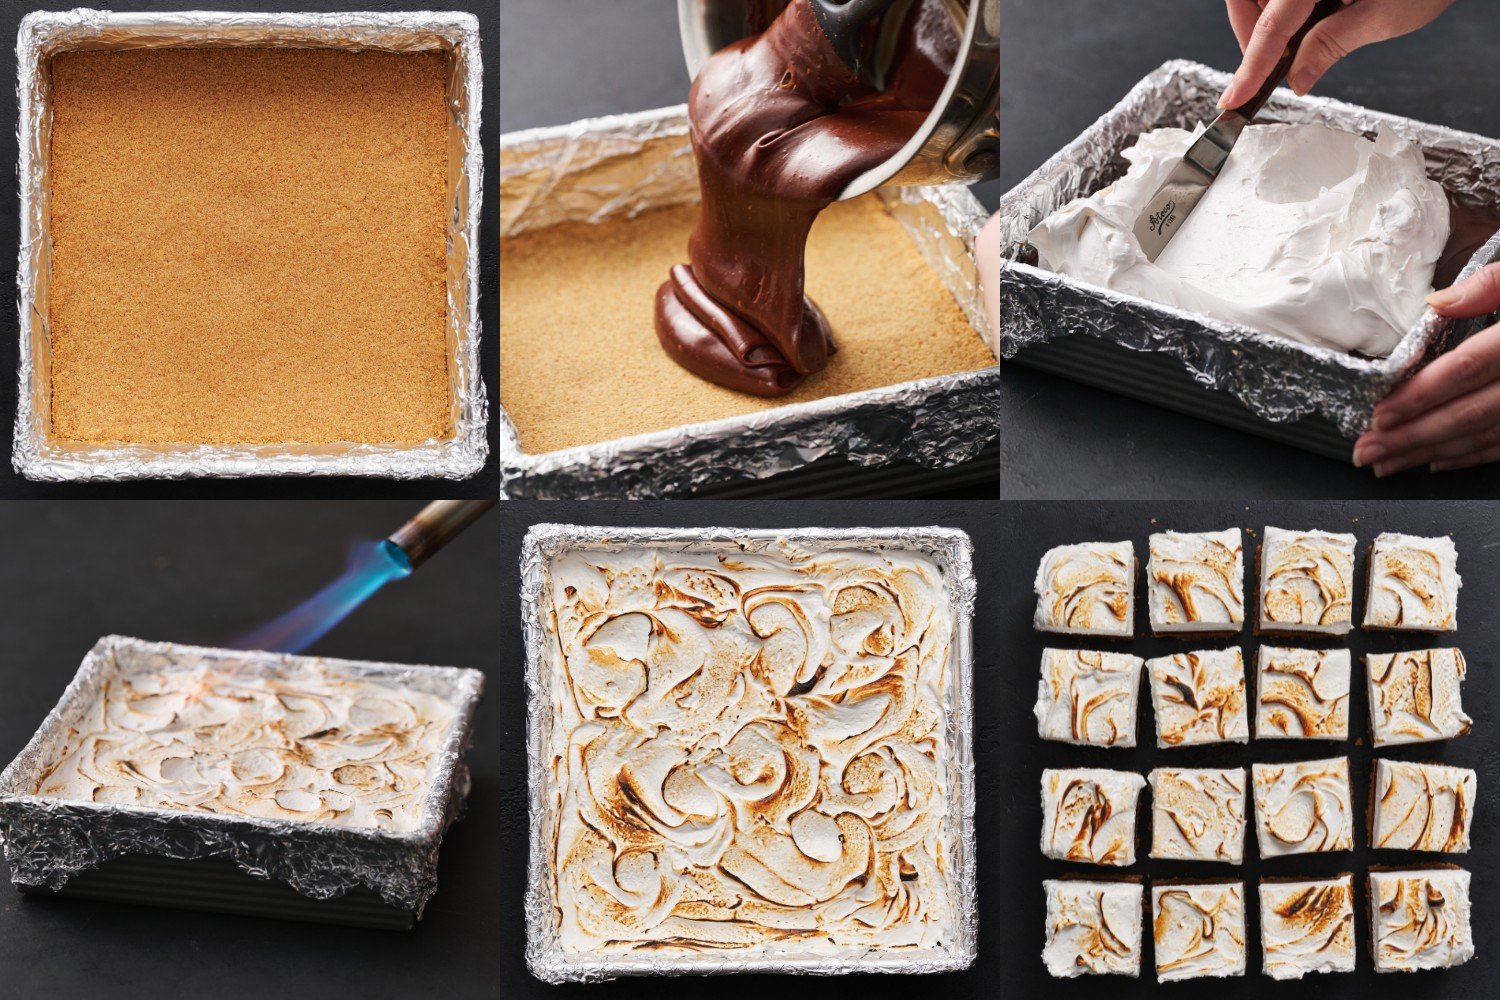 collage of six images, showing the crust before baking, then pouring on the chocolate layer, then spreading on the marshmallow layer, then torching the marshmallow, then the whole pan and the bars sliced up, ready to serve.